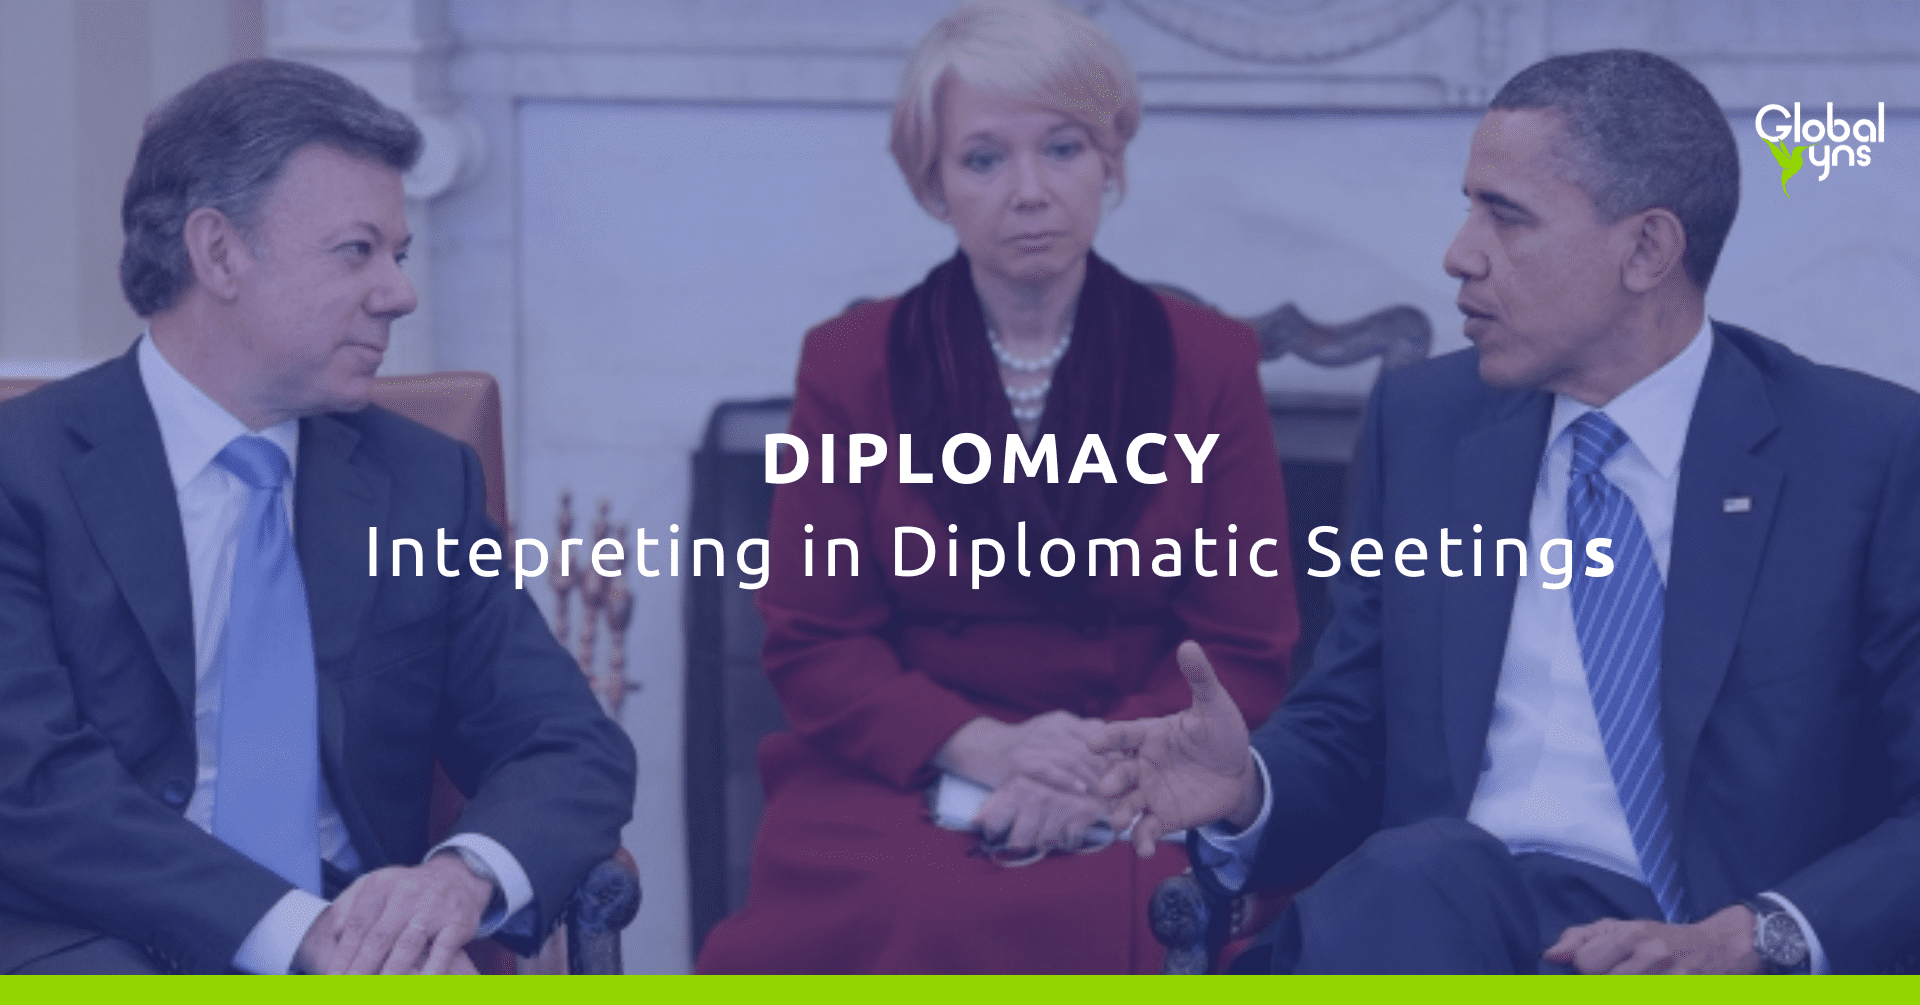 Why Effective Diplomatic Interpreting Requires Preparation